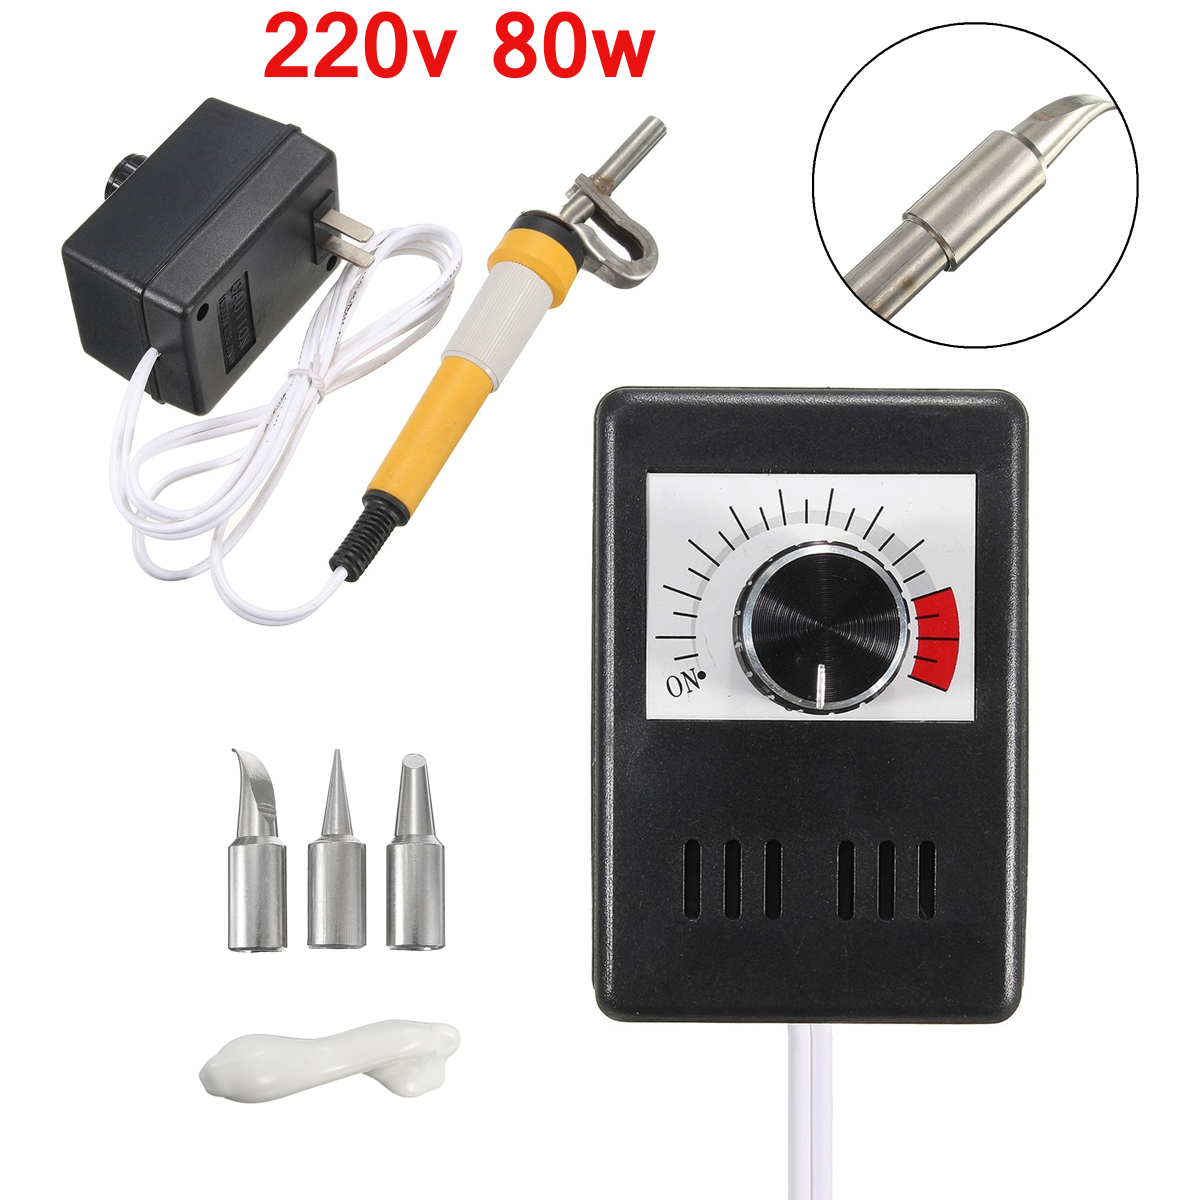 220V-80W-Adjustable-Temperature-Gourd-Wood-Multifunction-Pyrography-Machine-Heating-Wire-Pen-Kit-Too-1146807-1